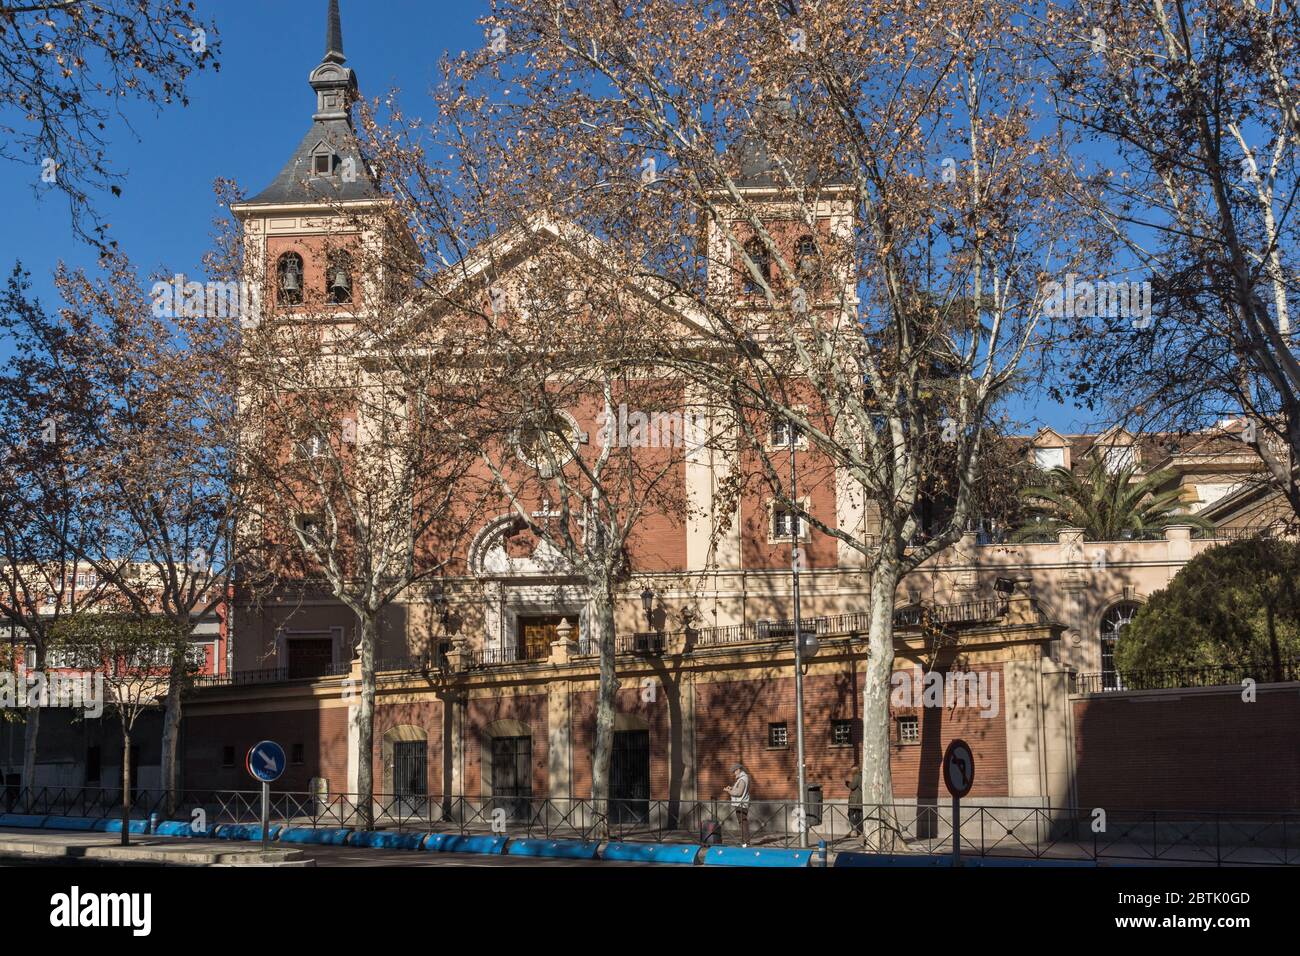 MADRID, SPAIN - JANUARY 22, 2018: Basilica of Our Lady of Atocha in City of Madrid, Spain Stock Photo